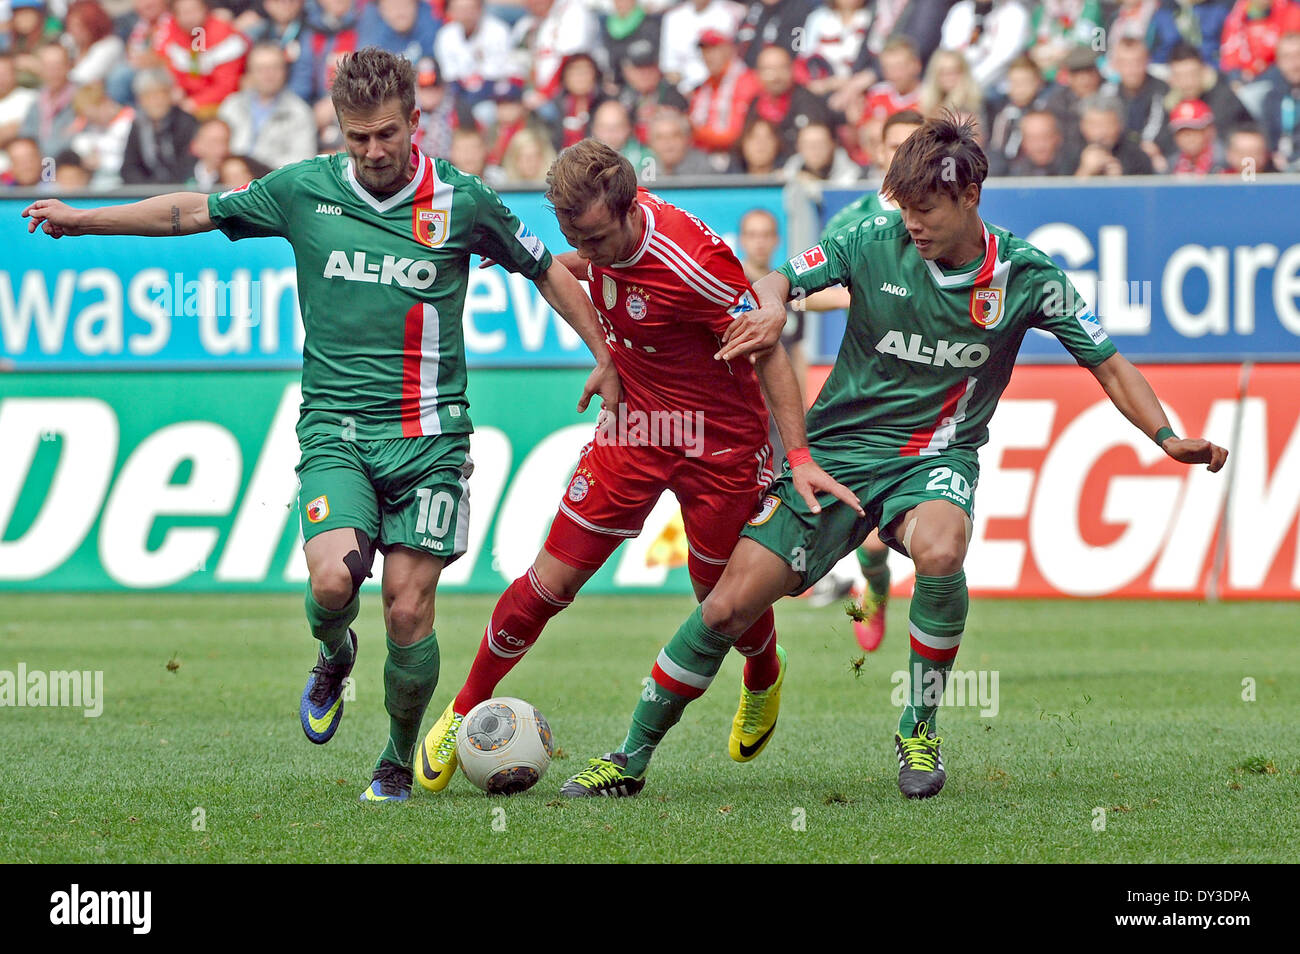 Augsburg, Germany. 05th Apr, 2014. Augsburg's Daniel Baier (L) and Jeong-Ho Hong and Munich's Mario Goetze (C) vie for the ball during the Bundesliga Soccer match between FC Augsburg and FC Bayern Munich at the SGL-Arena in Augsburg, Germany, 05 April 2014. Photo: Stefan Puchner/dpa (ATTENTION: Due to the accreditation guidelines, the DFL only permits the publication and utilisation of up to 15 pictures per match on the internet and in online media during the match.)/dpa/Alamy Live News Stock Photo